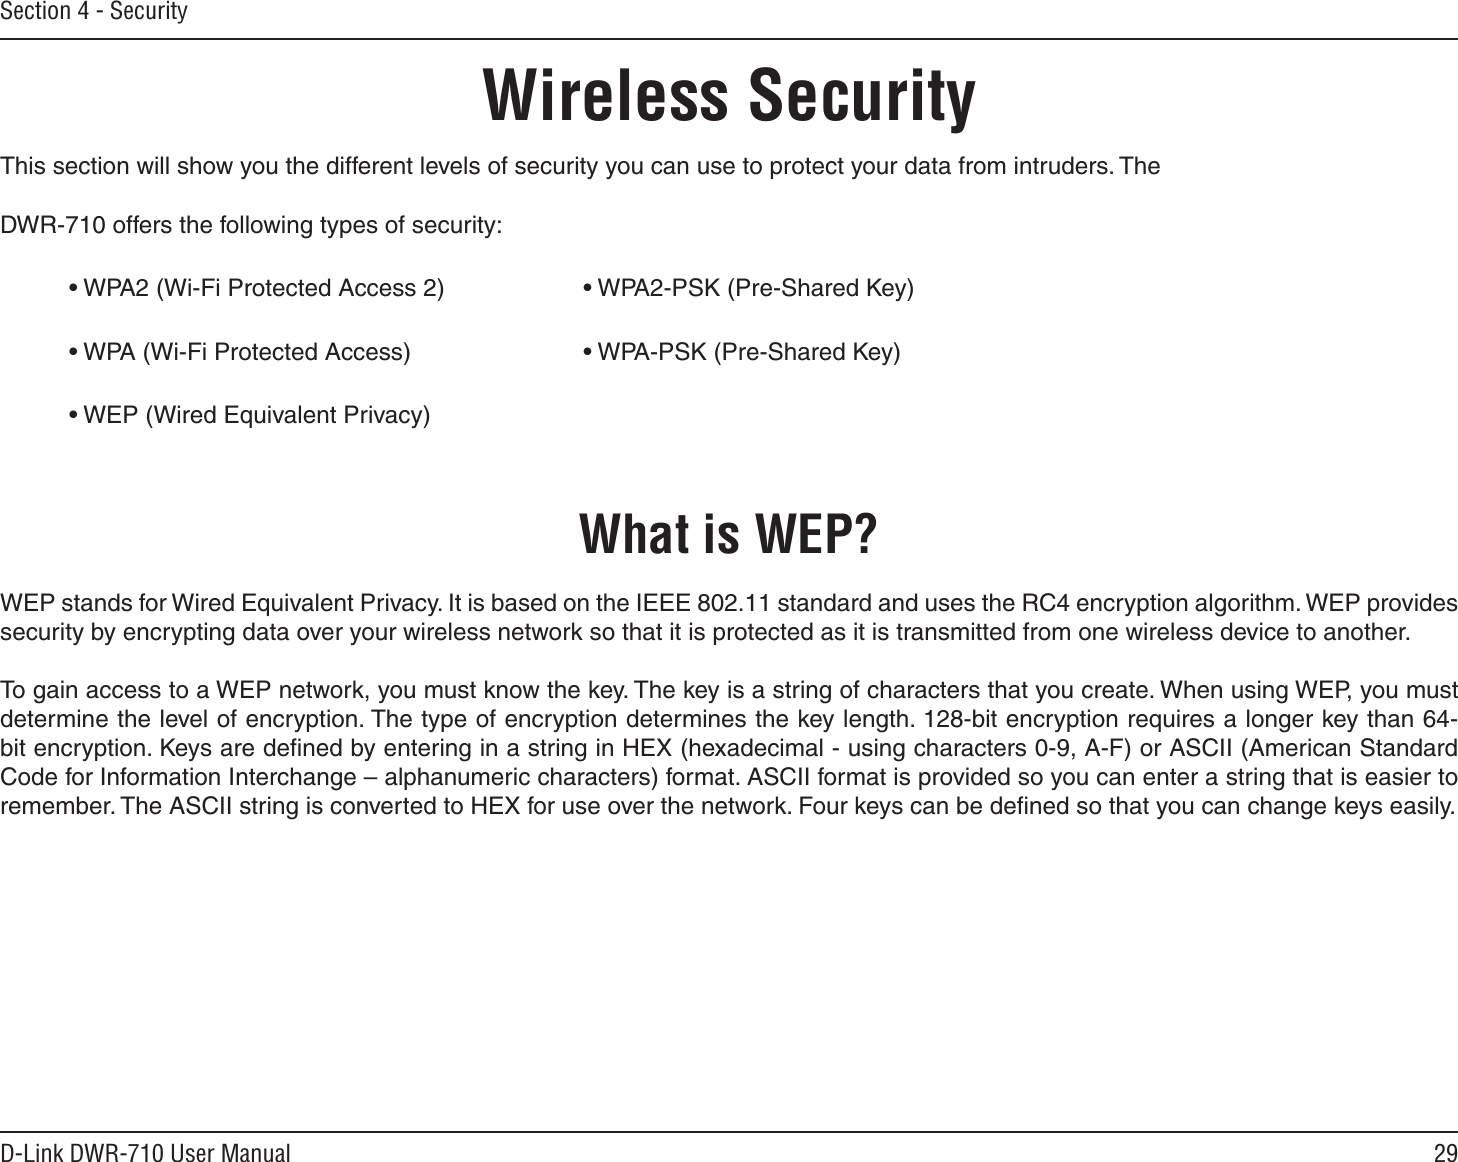 29D-Link DWR-710 User ManualSection 4 - SecurityWireless SecurityThis section will show you the different levels of security you can use to protect your data from intruders. The DWR-710 offers the following types of security:• WPA2 (Wi-Fi Protected Access 2)     • WPA2-PSK (Pre-Shared Key)• WPA (Wi-Fi Protected Access)      • WPA-PSK (Pre-Shared Key)• WEP (Wired Equivalent Privacy)What is WEP?WEP stands for Wired Equivalent Privacy. It is based on the IEEE 802.11 standard and uses the RC4 encryption algorithm. WEP provides security by encrypting data over your wireless network so that it is protected as it is transmitted from one wireless device to another.To gain access to a WEP network, you must know the key. The key is a string of characters that you create. When using WEP, you must determine the level of encryption. The type of encryption determines the key length. 128-bit encryption requires a longer key than 64-bit encryption. Keys are deﬁned by entering in a string in HEX (hexadecimal - using characters 0-9, A-F) or ASCII (American Standard Code for Information Interchange – alphanumeric characters) format. ASCII format is provided so you can enter a string that is easier to remember. The ASCII string is converted to HEX for use over the network. Four keys can be deﬁned so that you can change keys easily.